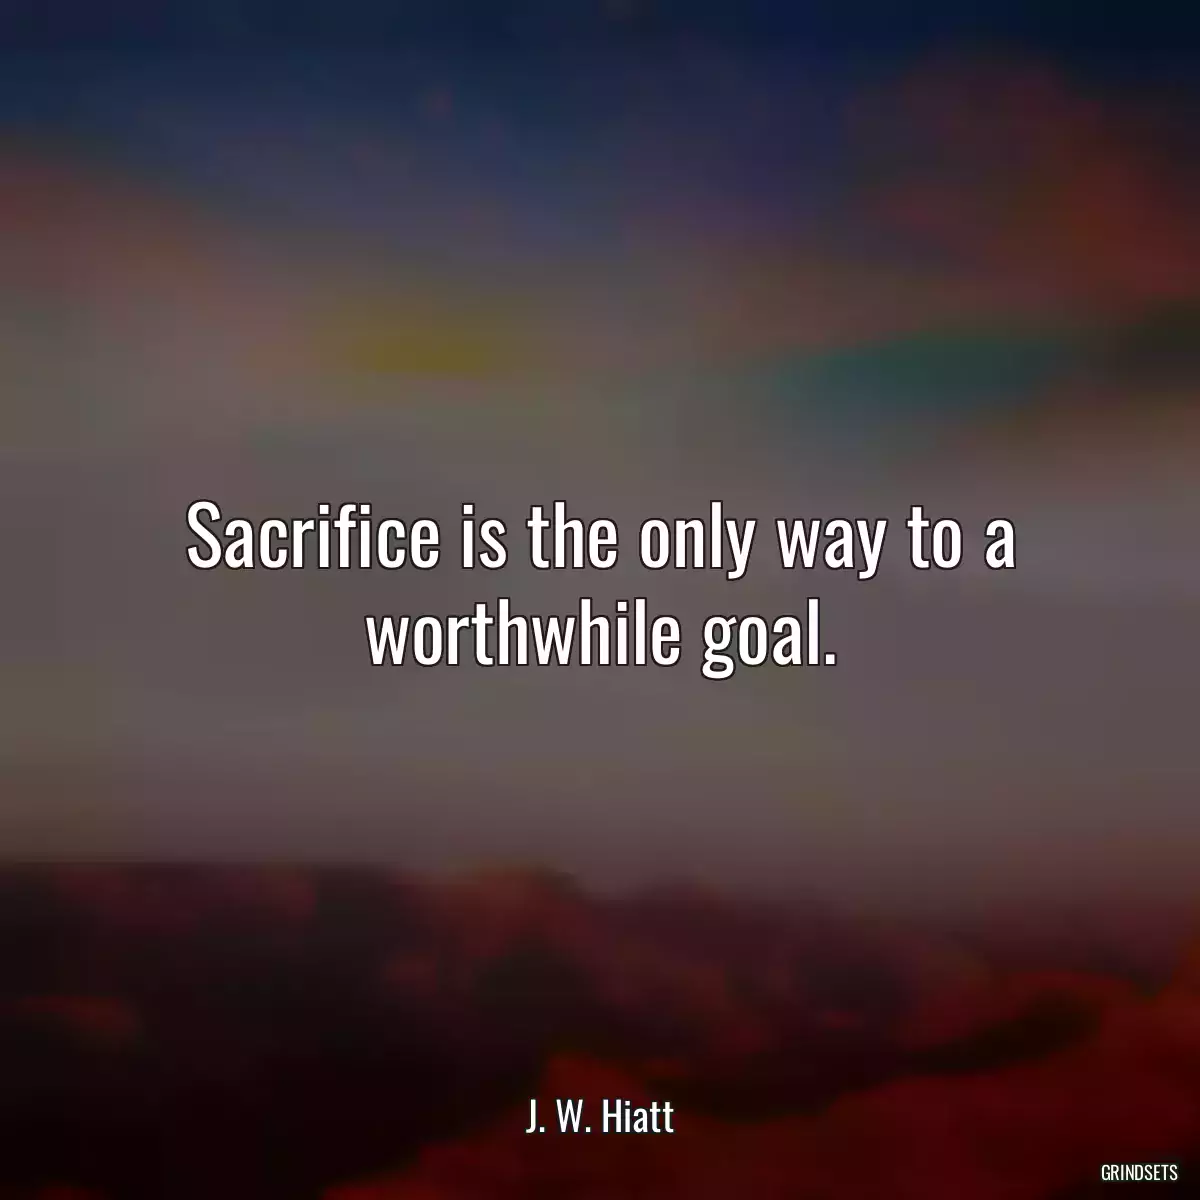 Sacrifice is the only way to a worthwhile goal.